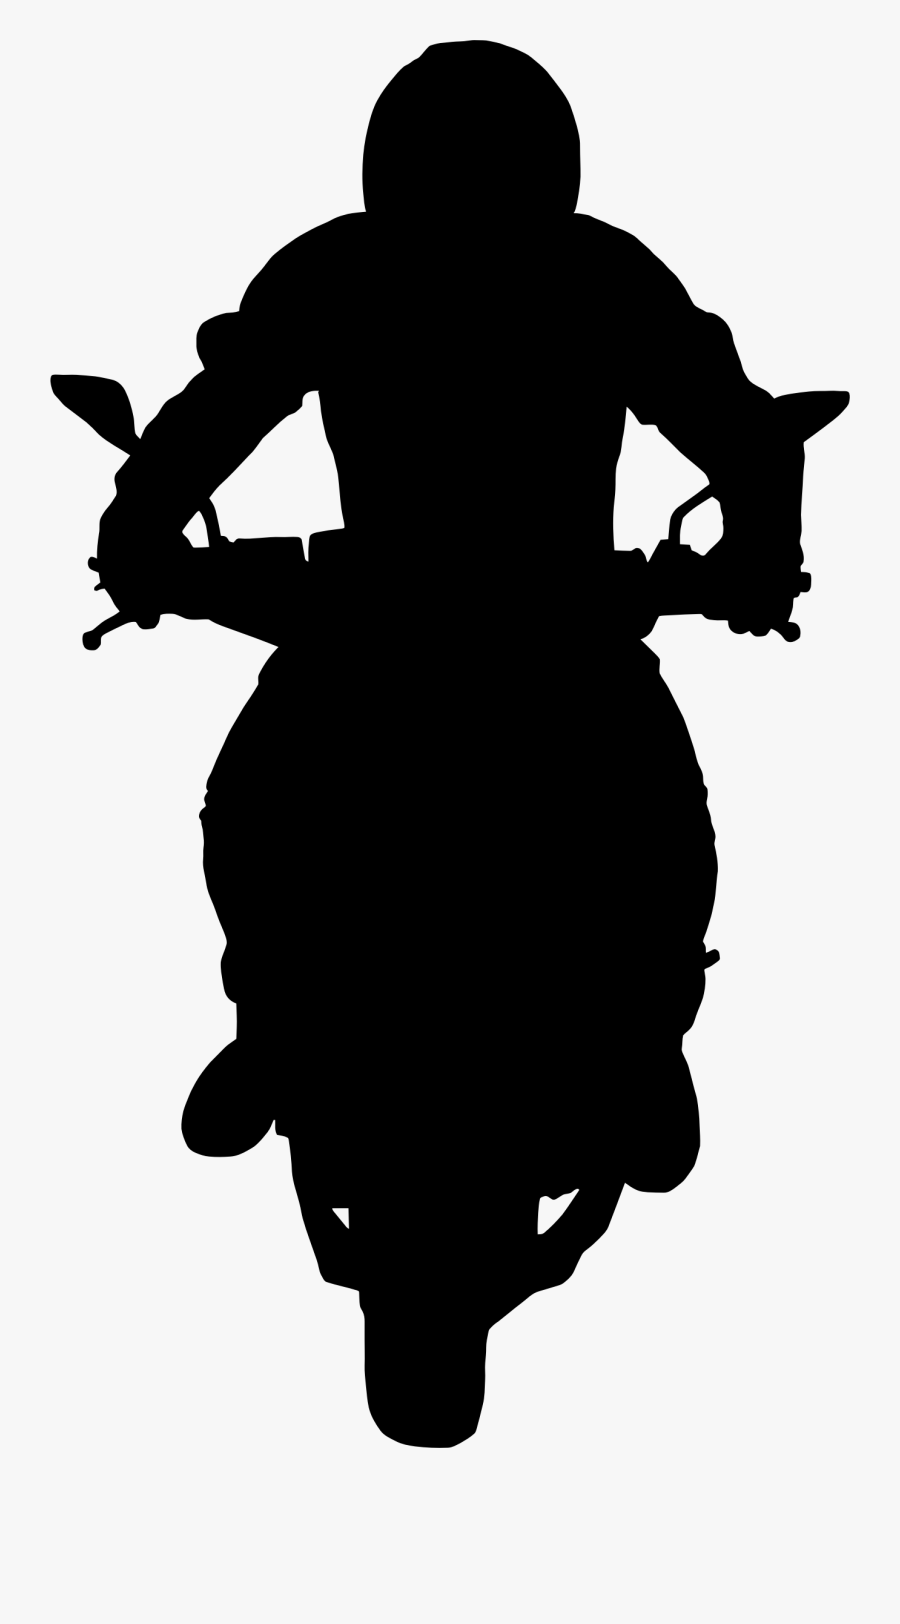 Silhouette Of A Motorcycle Clipart - Man On Motorcycle Silhouette, Transparent Clipart